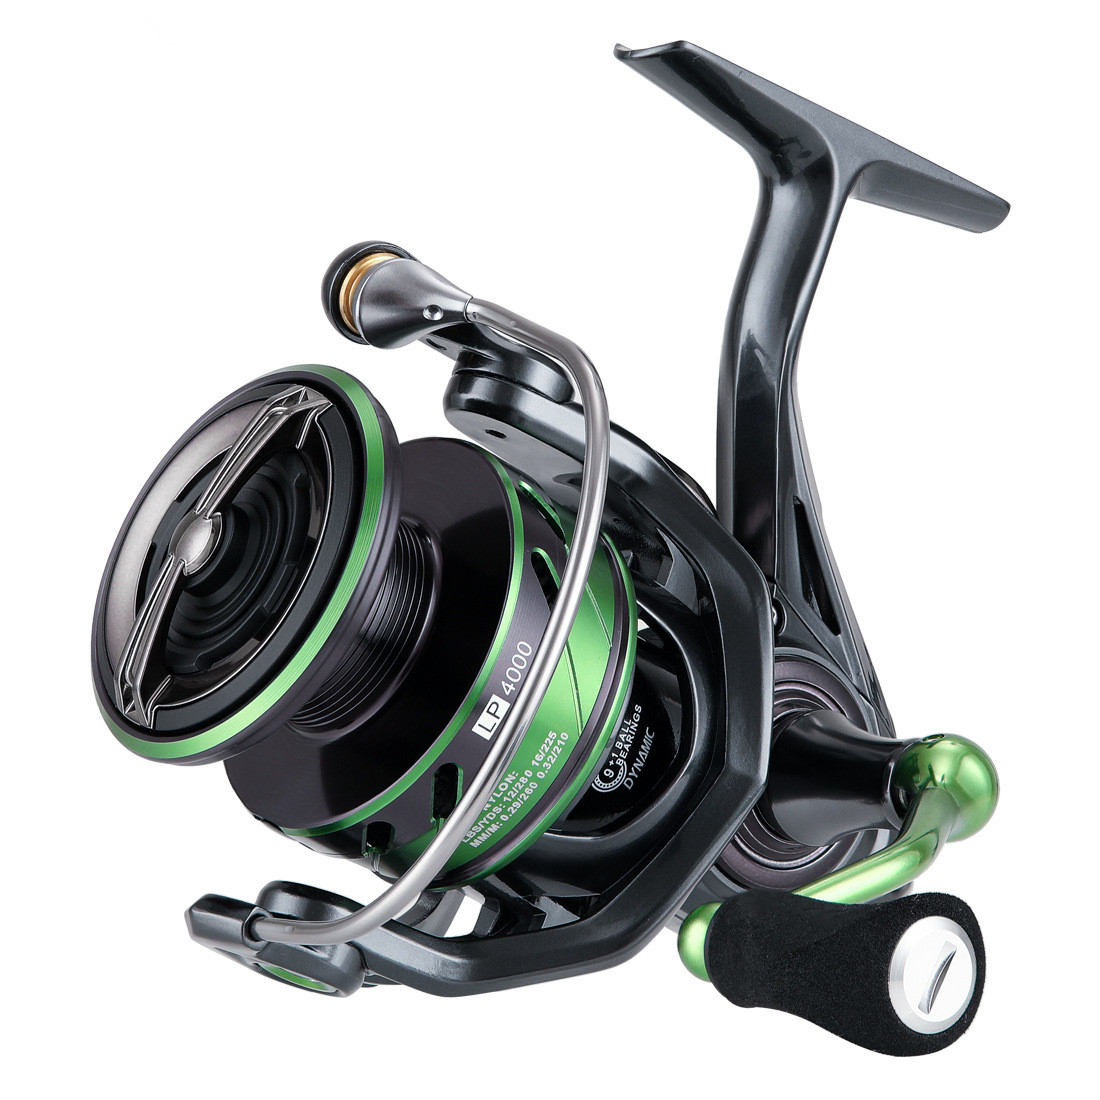 Fishing Reels, 5.2:1 Durable Gear MAX Drag 28lb Smoother Winding Spinning Fishing Reel WR3 X NEW